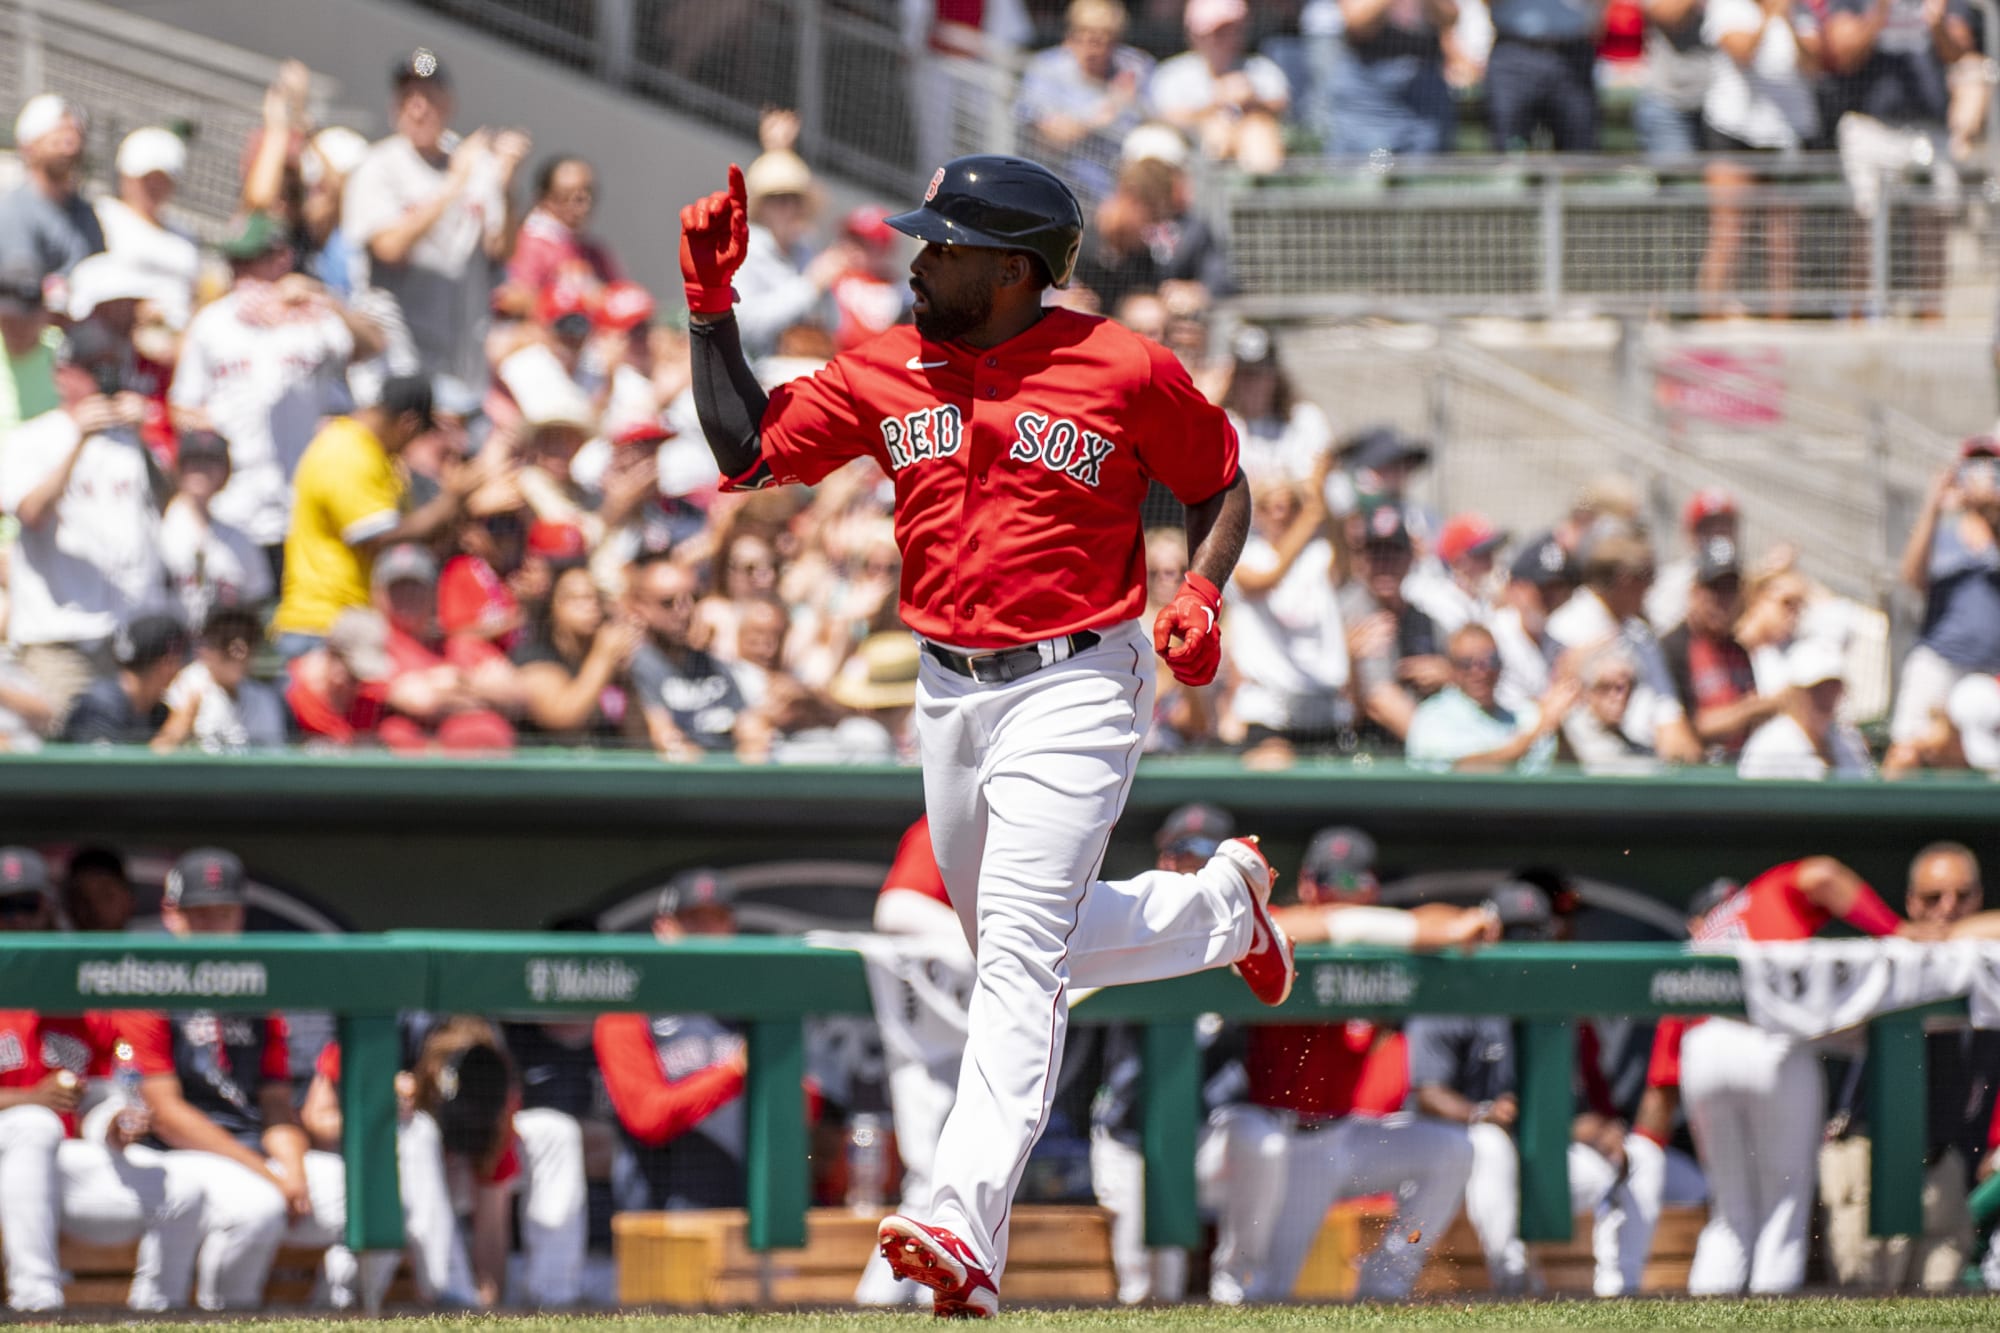 The Boston Red Sox outfield lacks a top right fielder